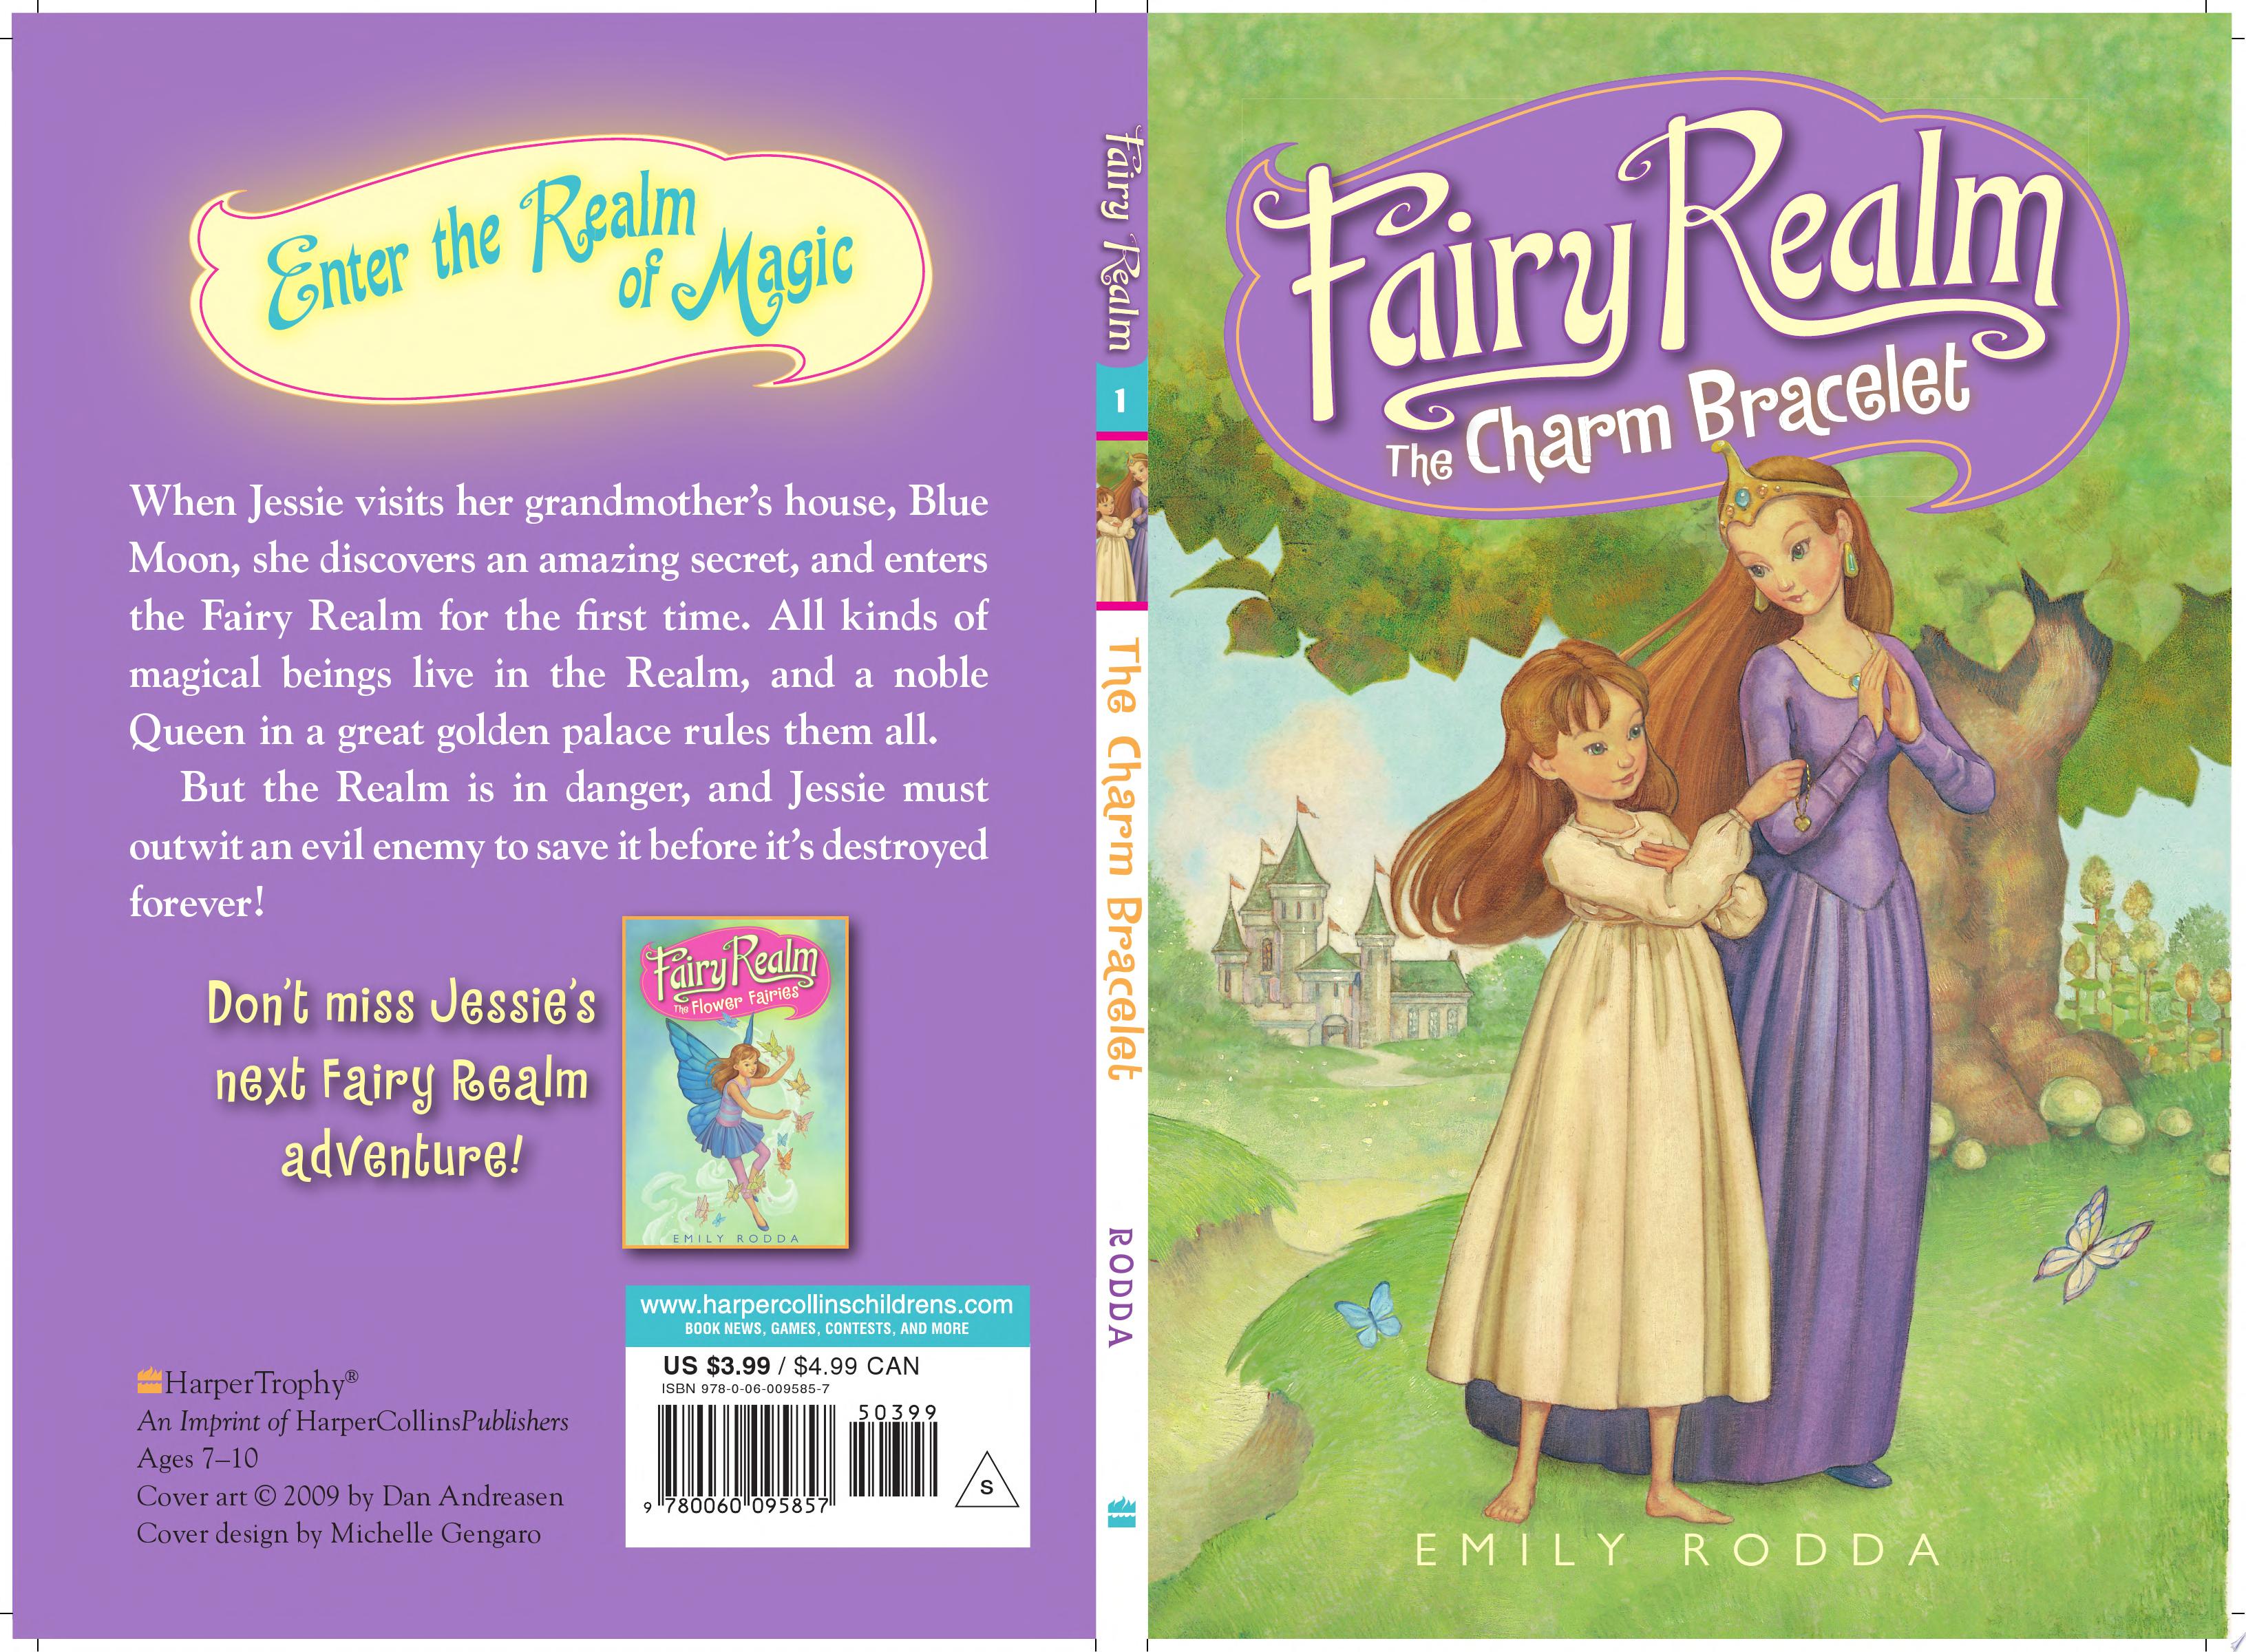 Image for "Fairy Realm #1: The Charm Bracelet"